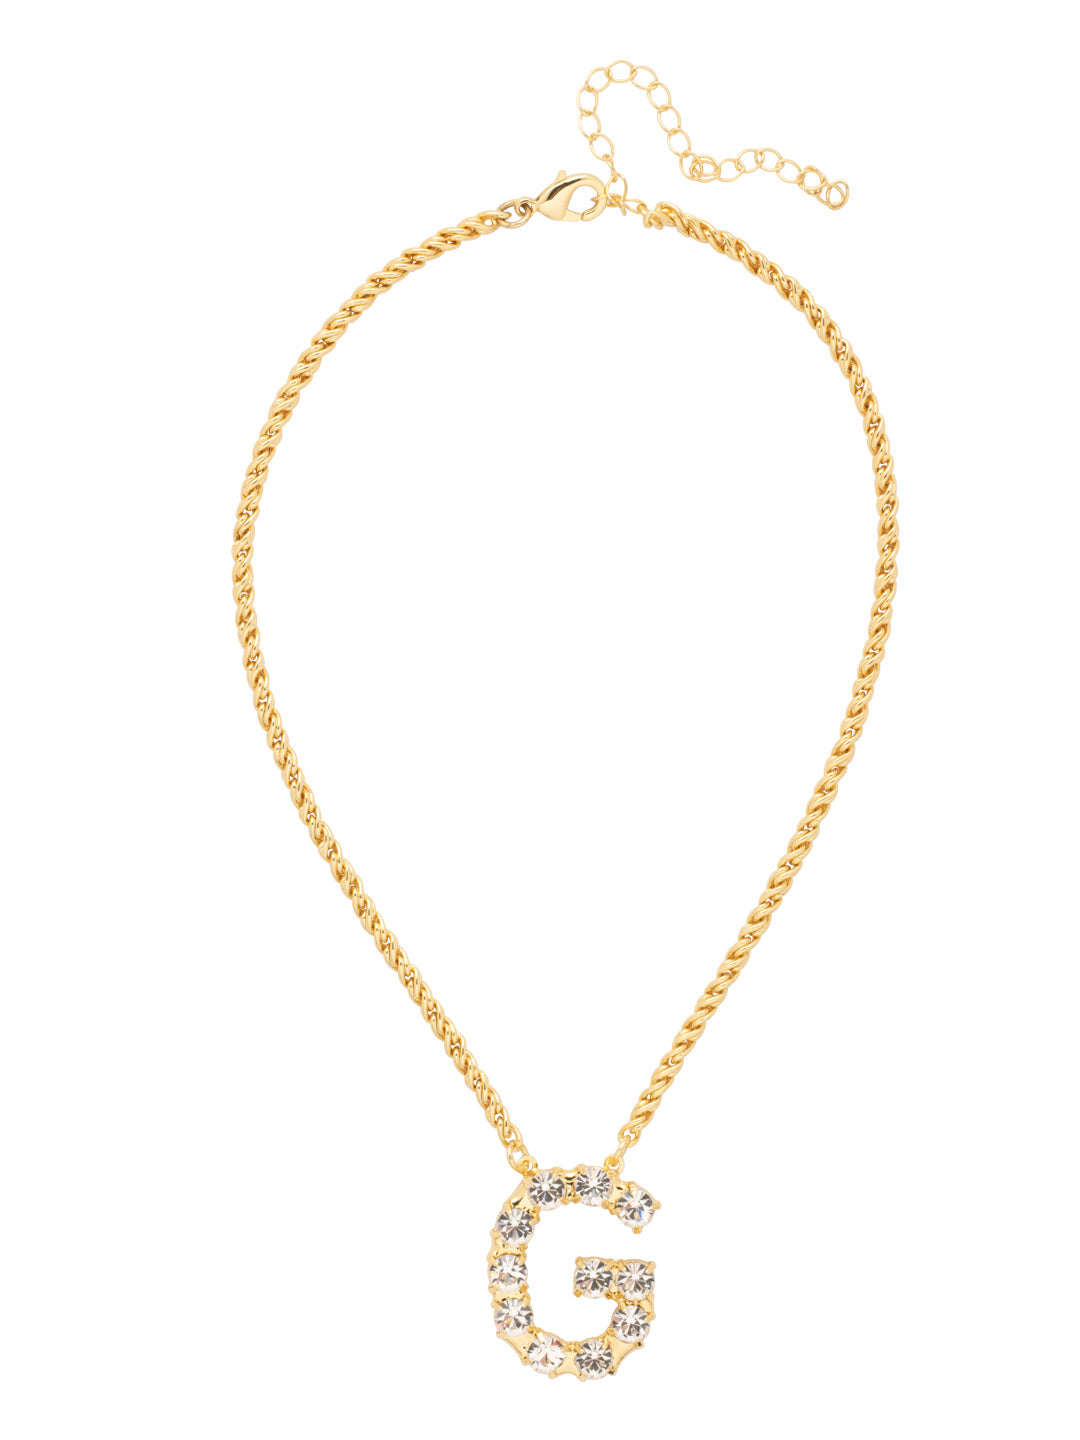 G Initial Rope Pendant Necklace - NFK26BGCRY - <p>The Initial Rope Pendant Necklace features a crystal encrusted metal monogram pendant on an adjustable rope chain, secured with a lobster claw clasp. From Sorrelli's Crystal collection in our Bright Gold-tone finish.</p>